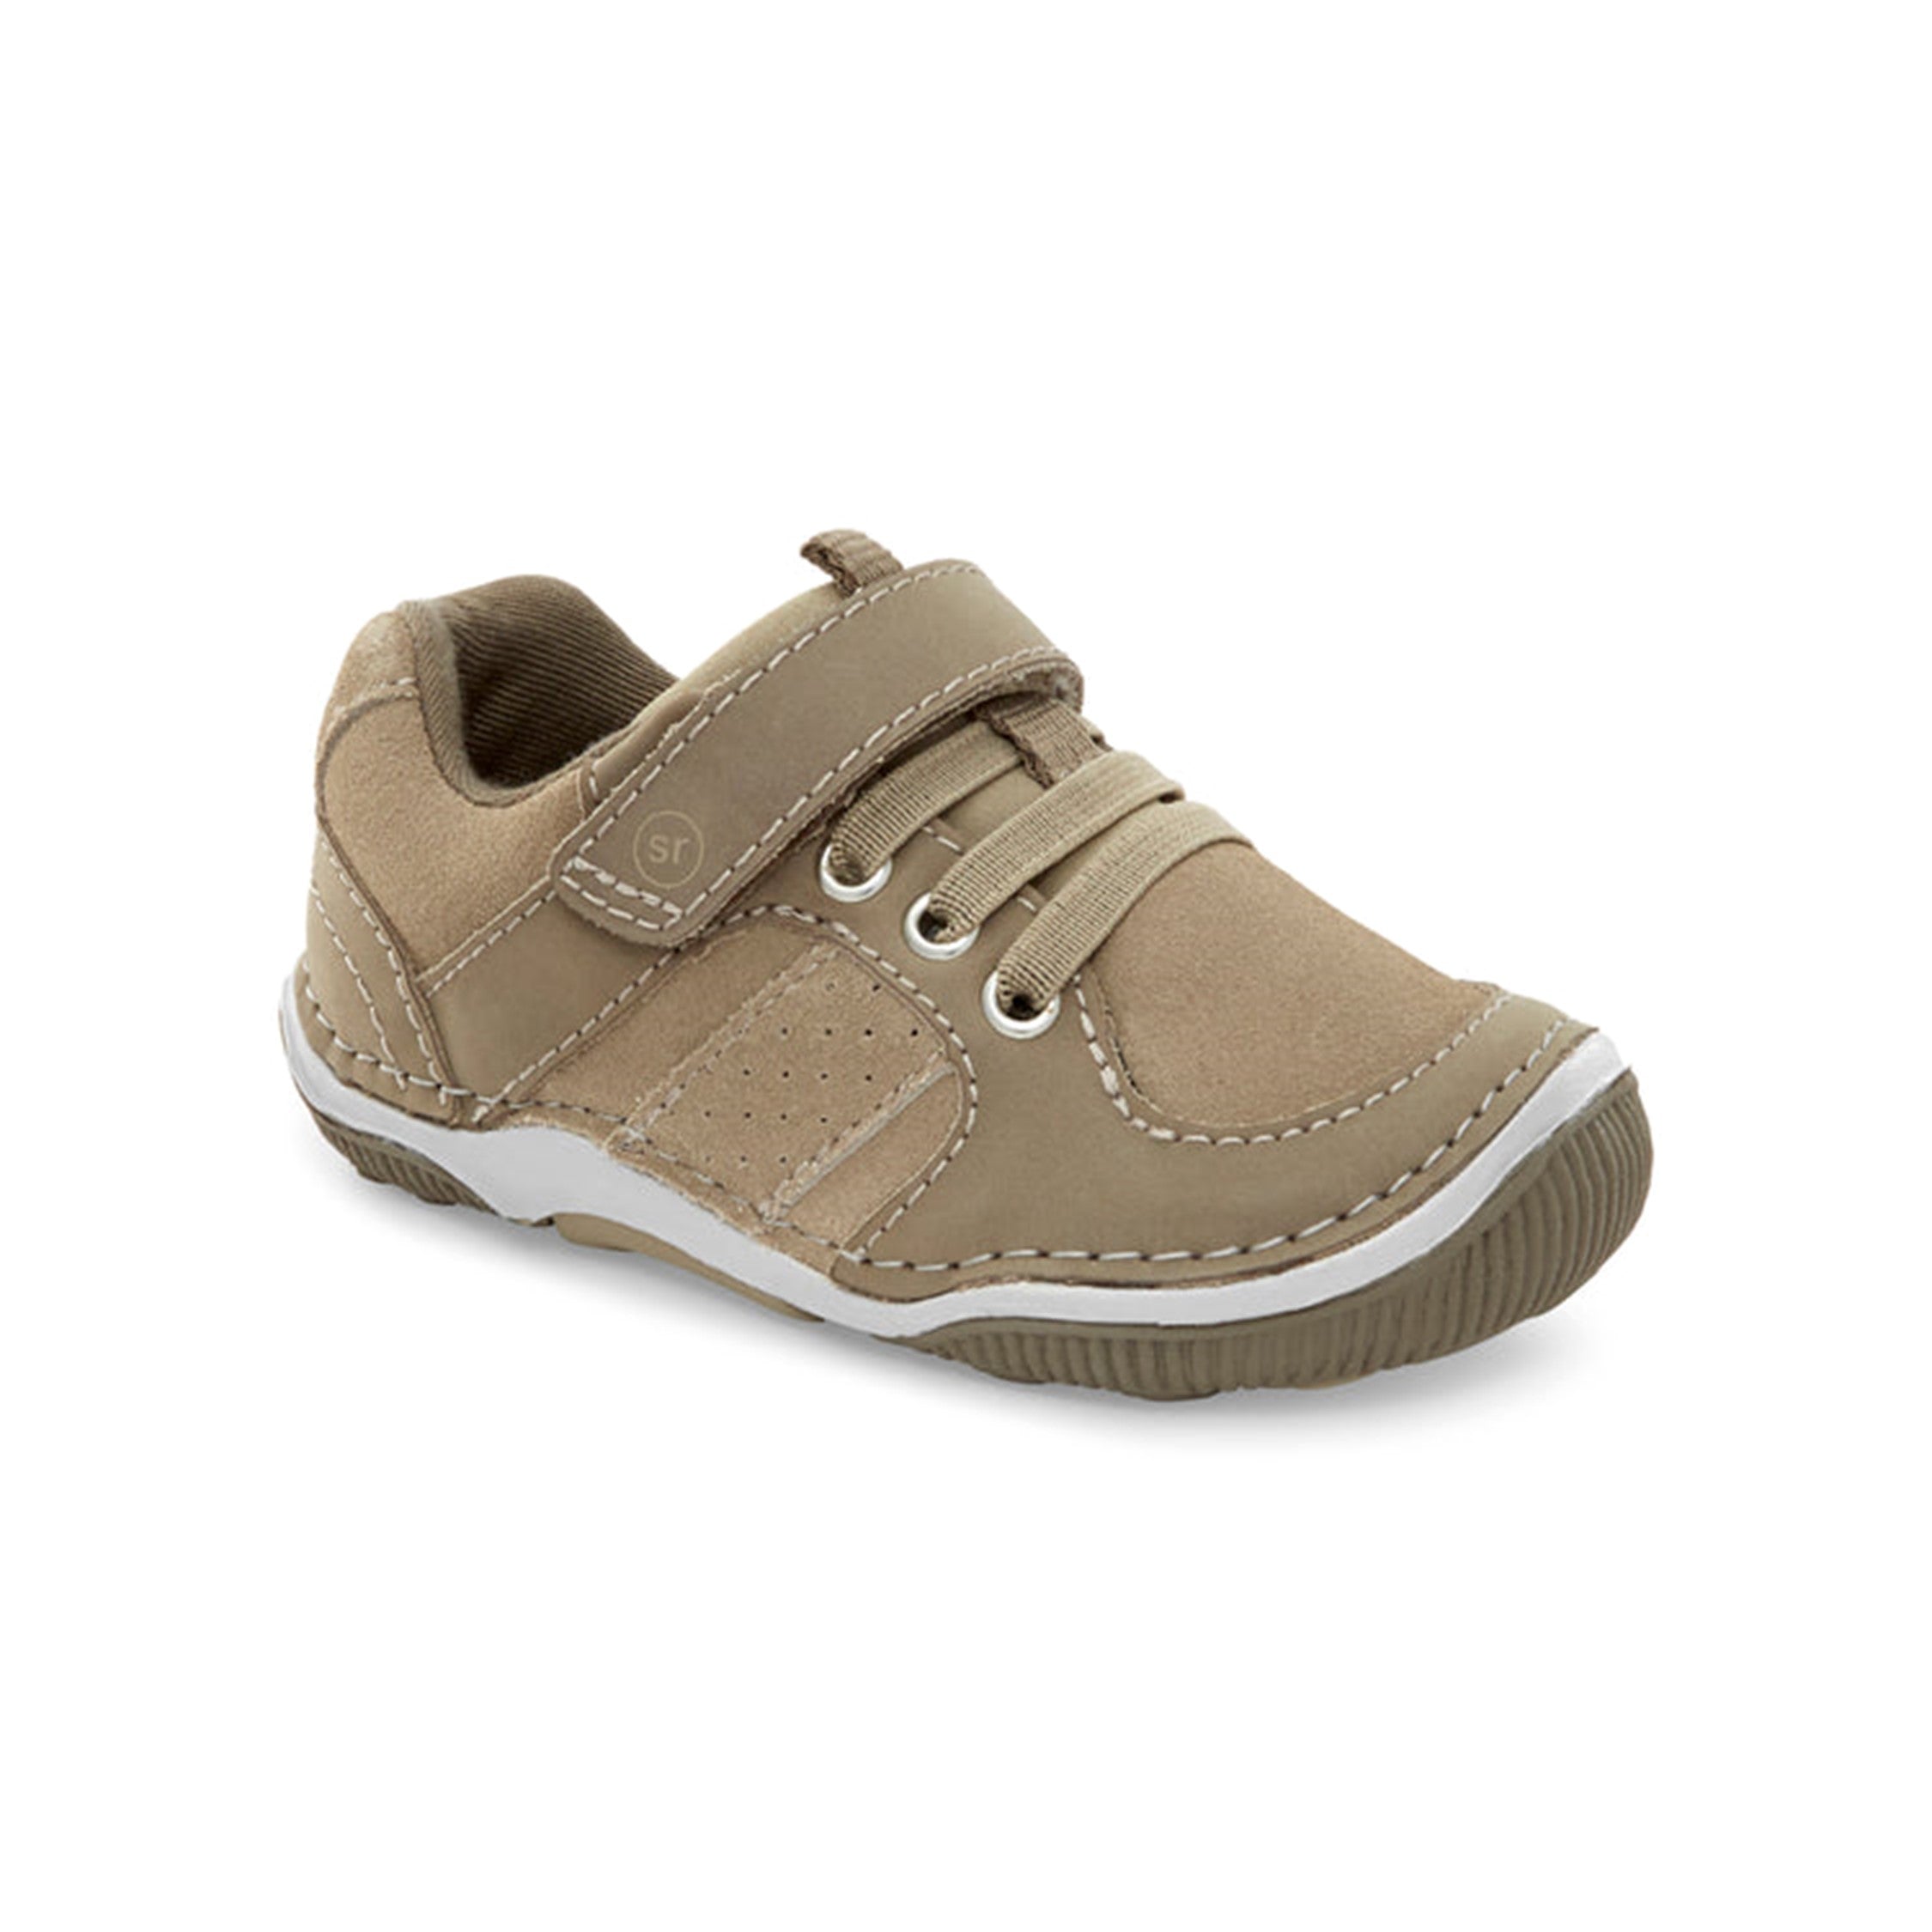 SRTech Wes Kid's Leather Sneaker - Taupe